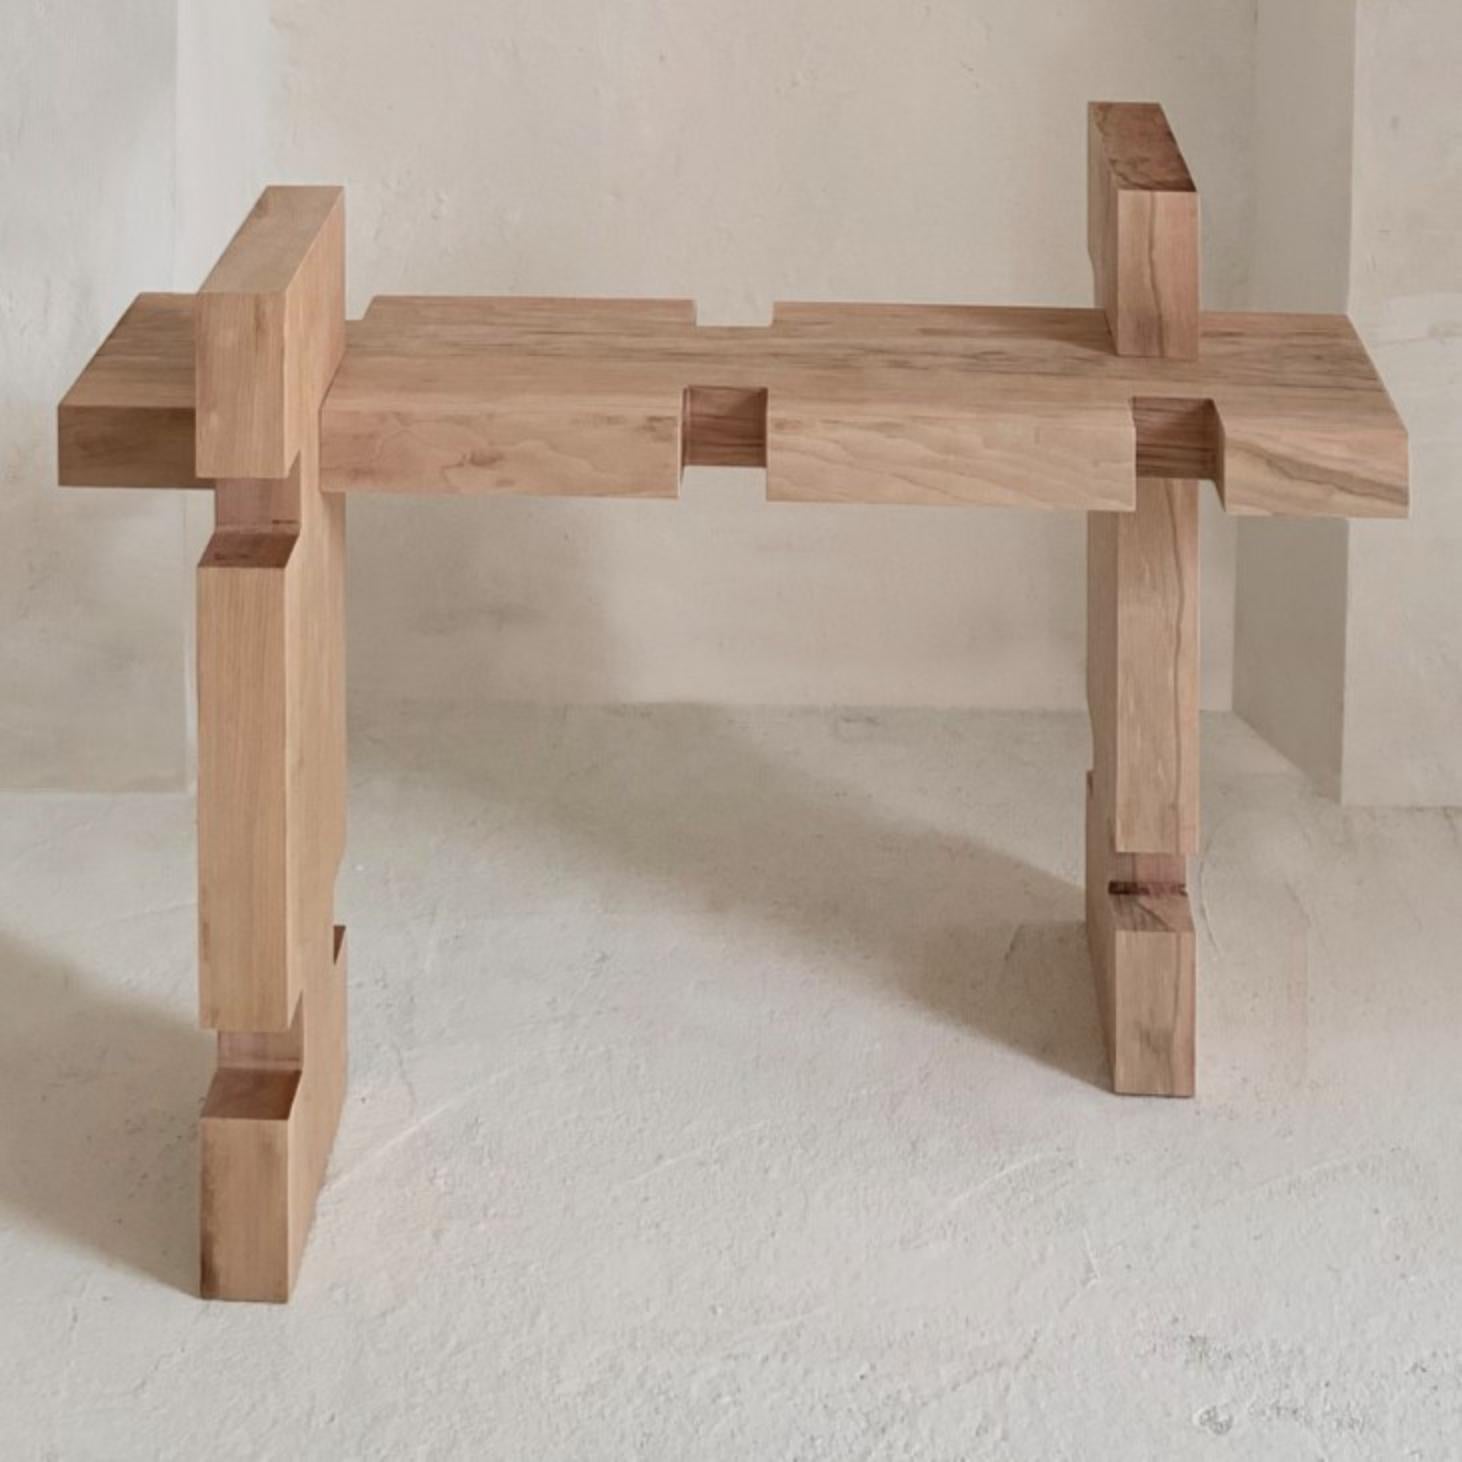 Element Stool S by Nana Zaalishvili
Dimensions: W 75 x D 40 x H 55 cm
Materials: Century Old Oak

‘Element’, which combines furniture of different functions, was created under the influence of the Georgian Oda house and the 'construction element' by